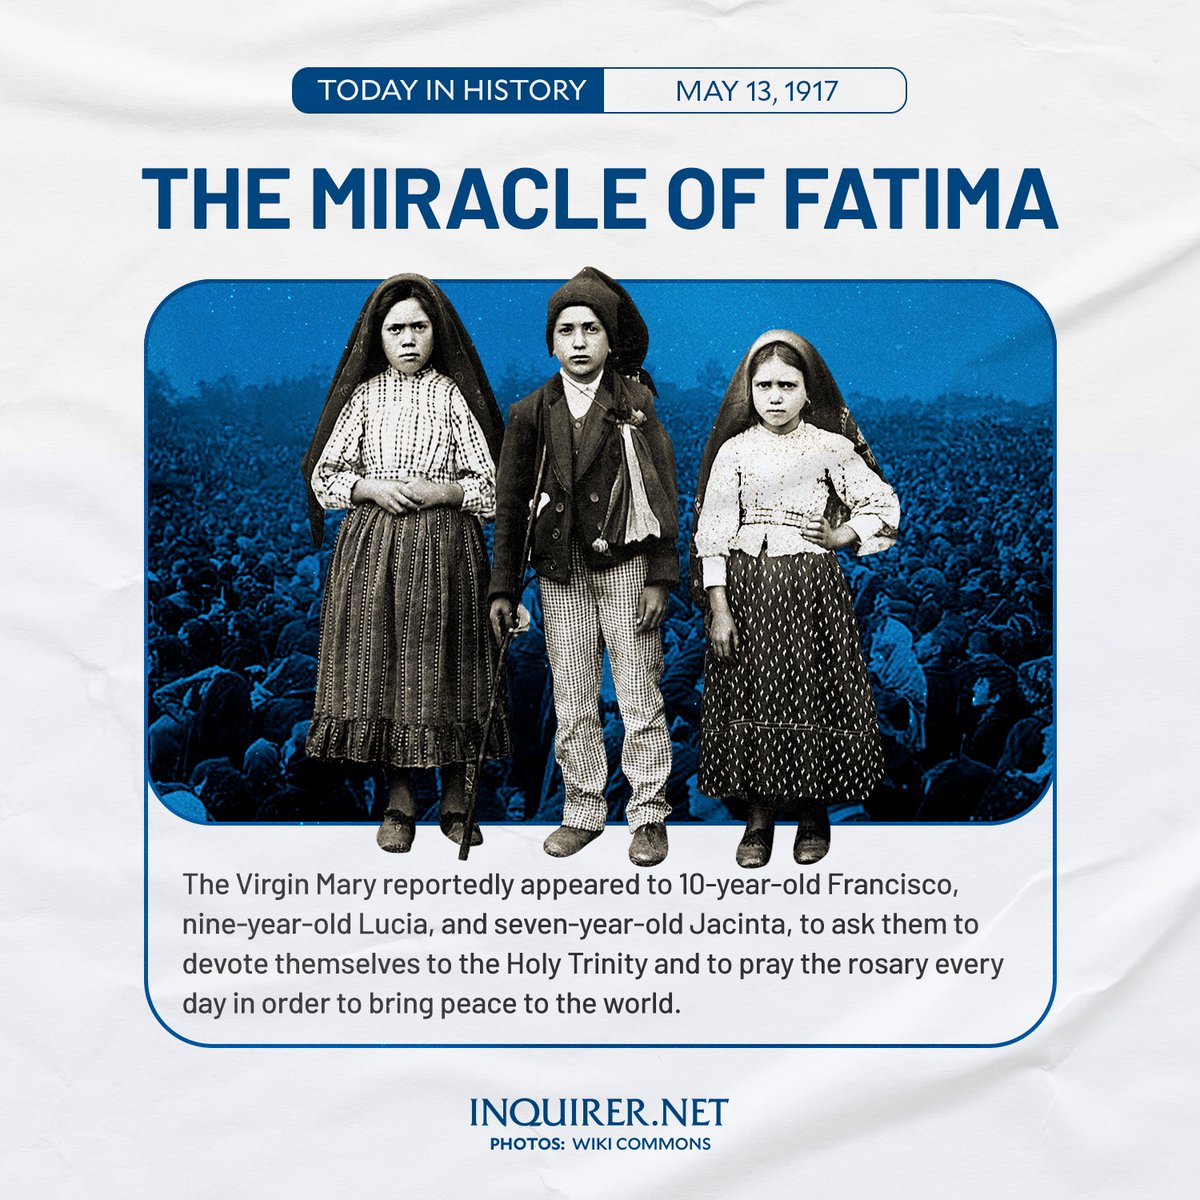 Our Lady of Fatima, pray for us. 🙏 Today, May 13, marks the 107th anniversary of the Apparition of Our Lady of Fatima.